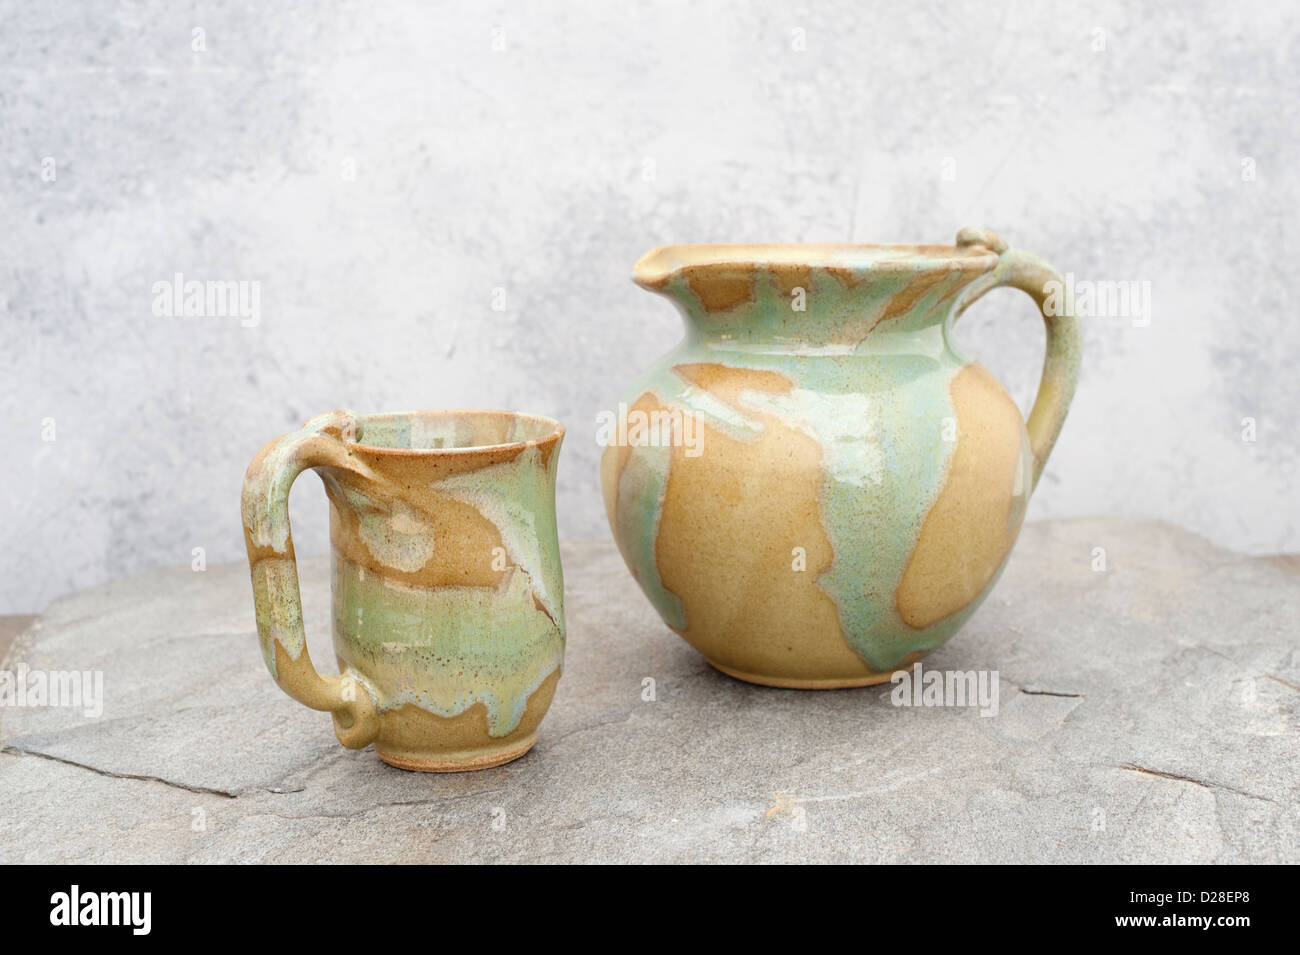 Still life photograph of a ceramic pitcher and cup. Stock Photo